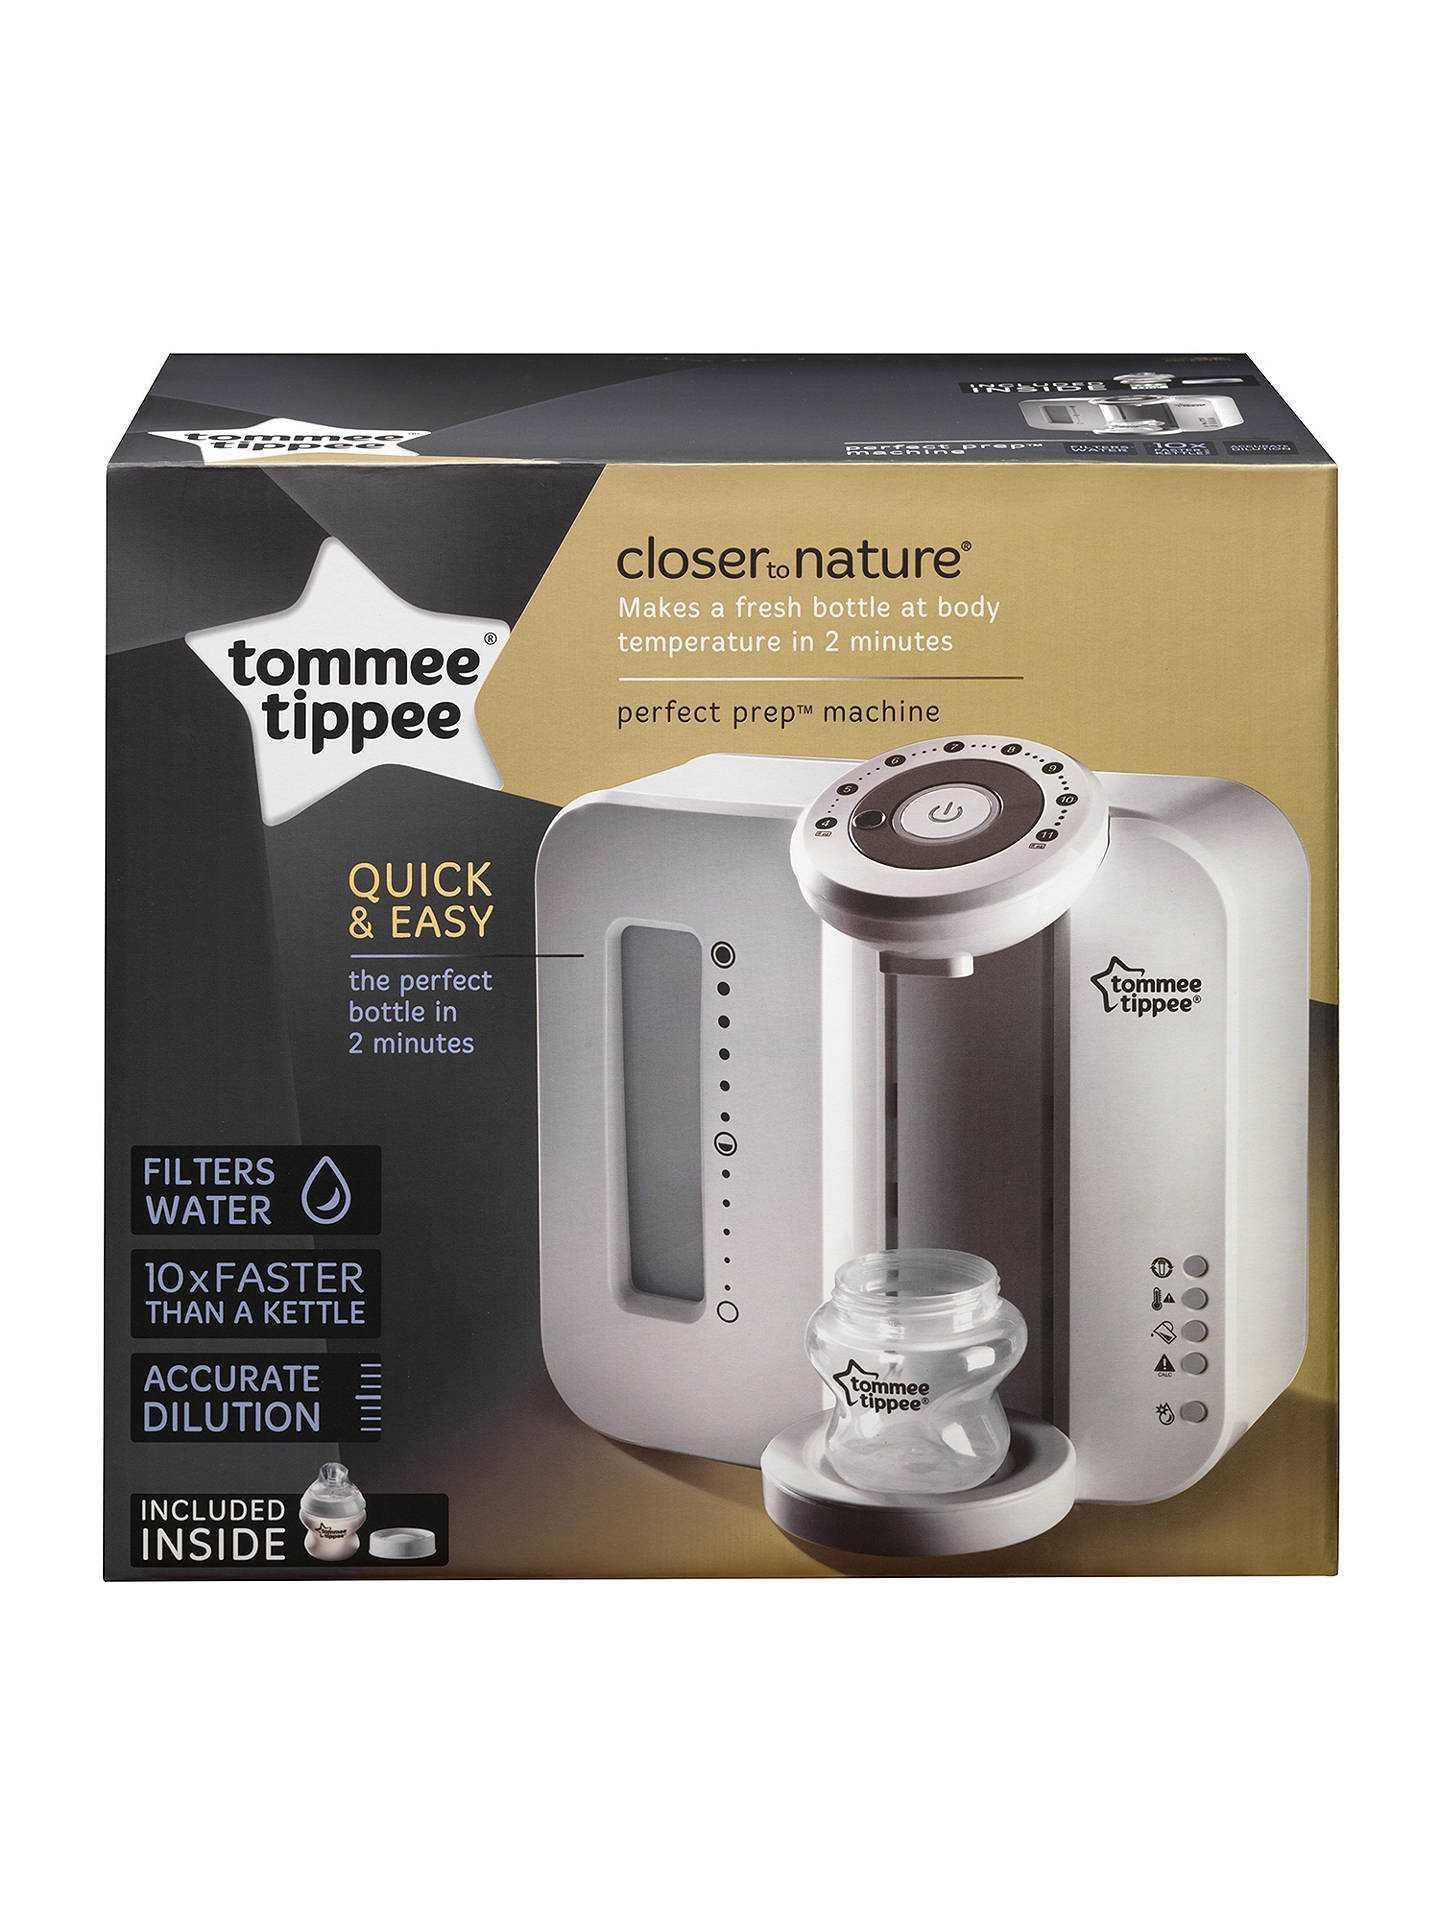 Rrp £70 Tommee Tippee Perfect Prep Machine